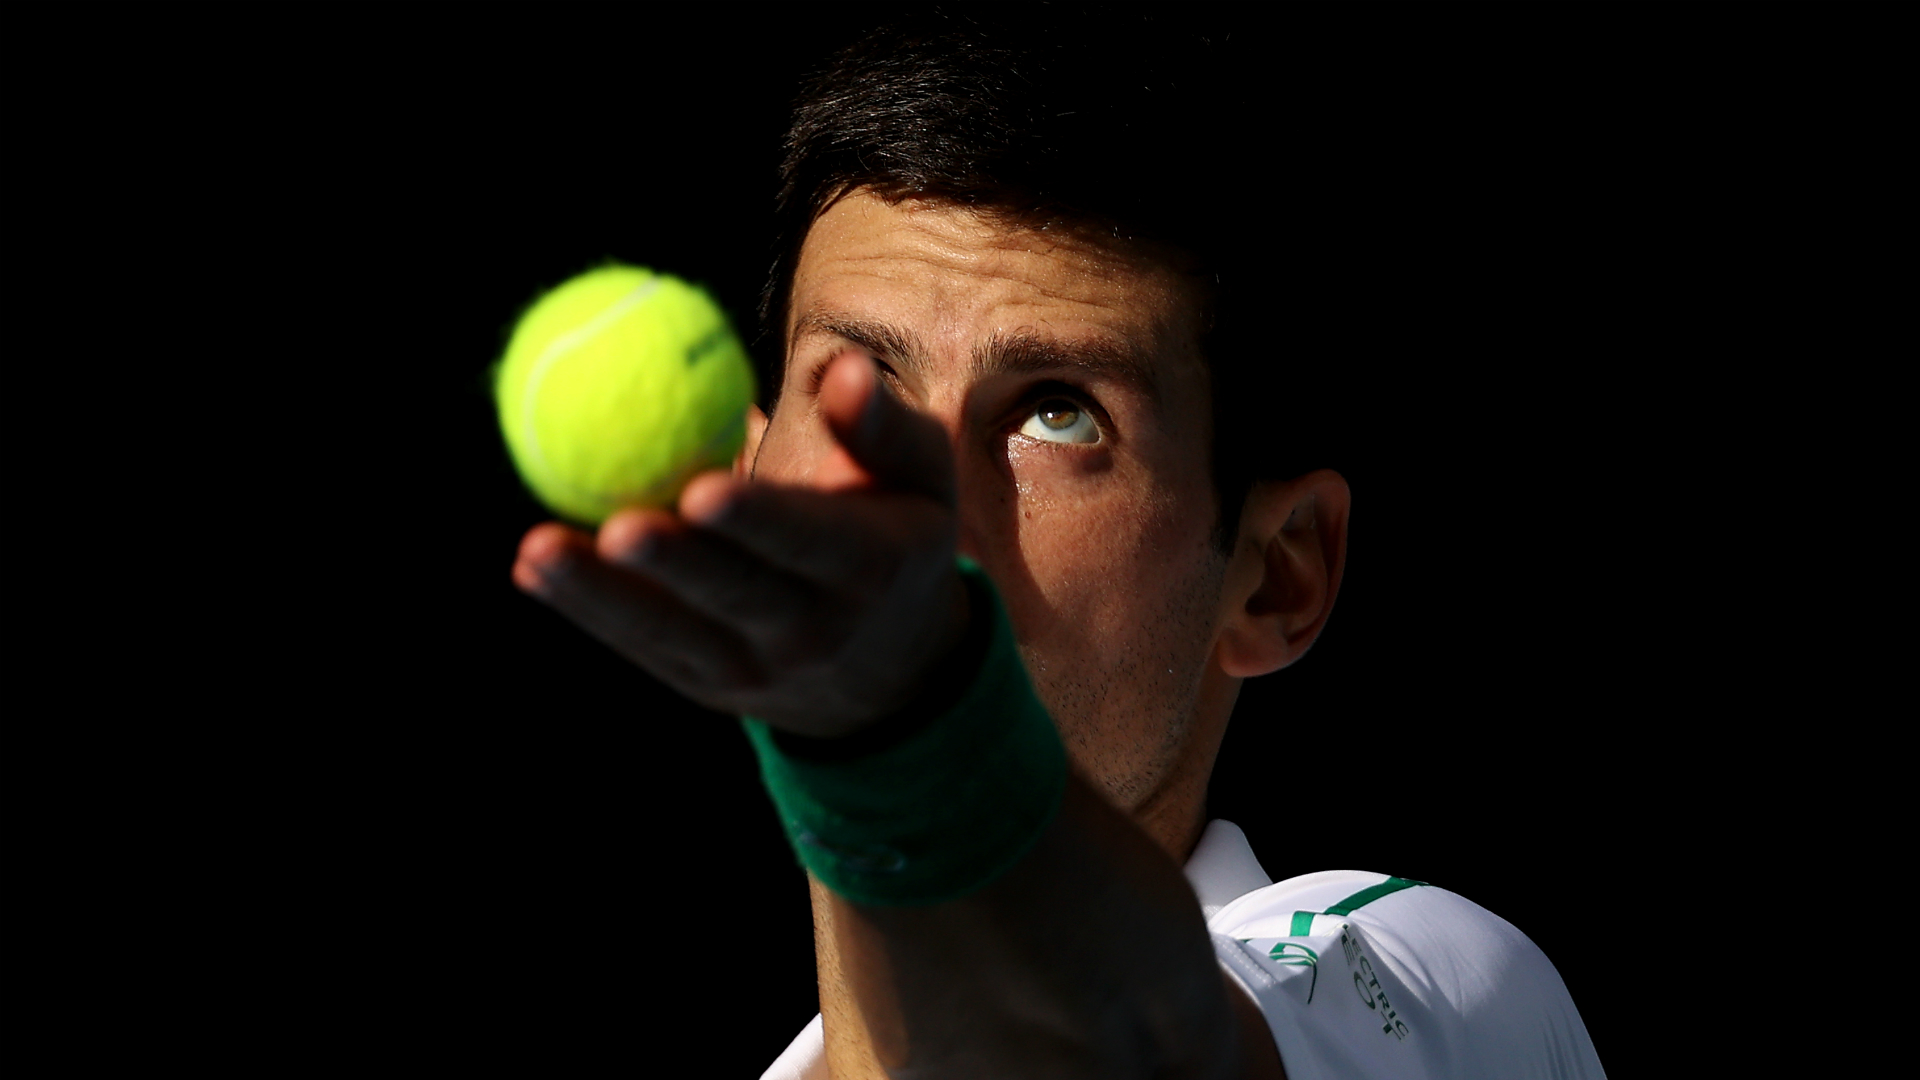 We take a closer look at Novak Djokovic's form as his Australian Open campaign continues on Sunday.